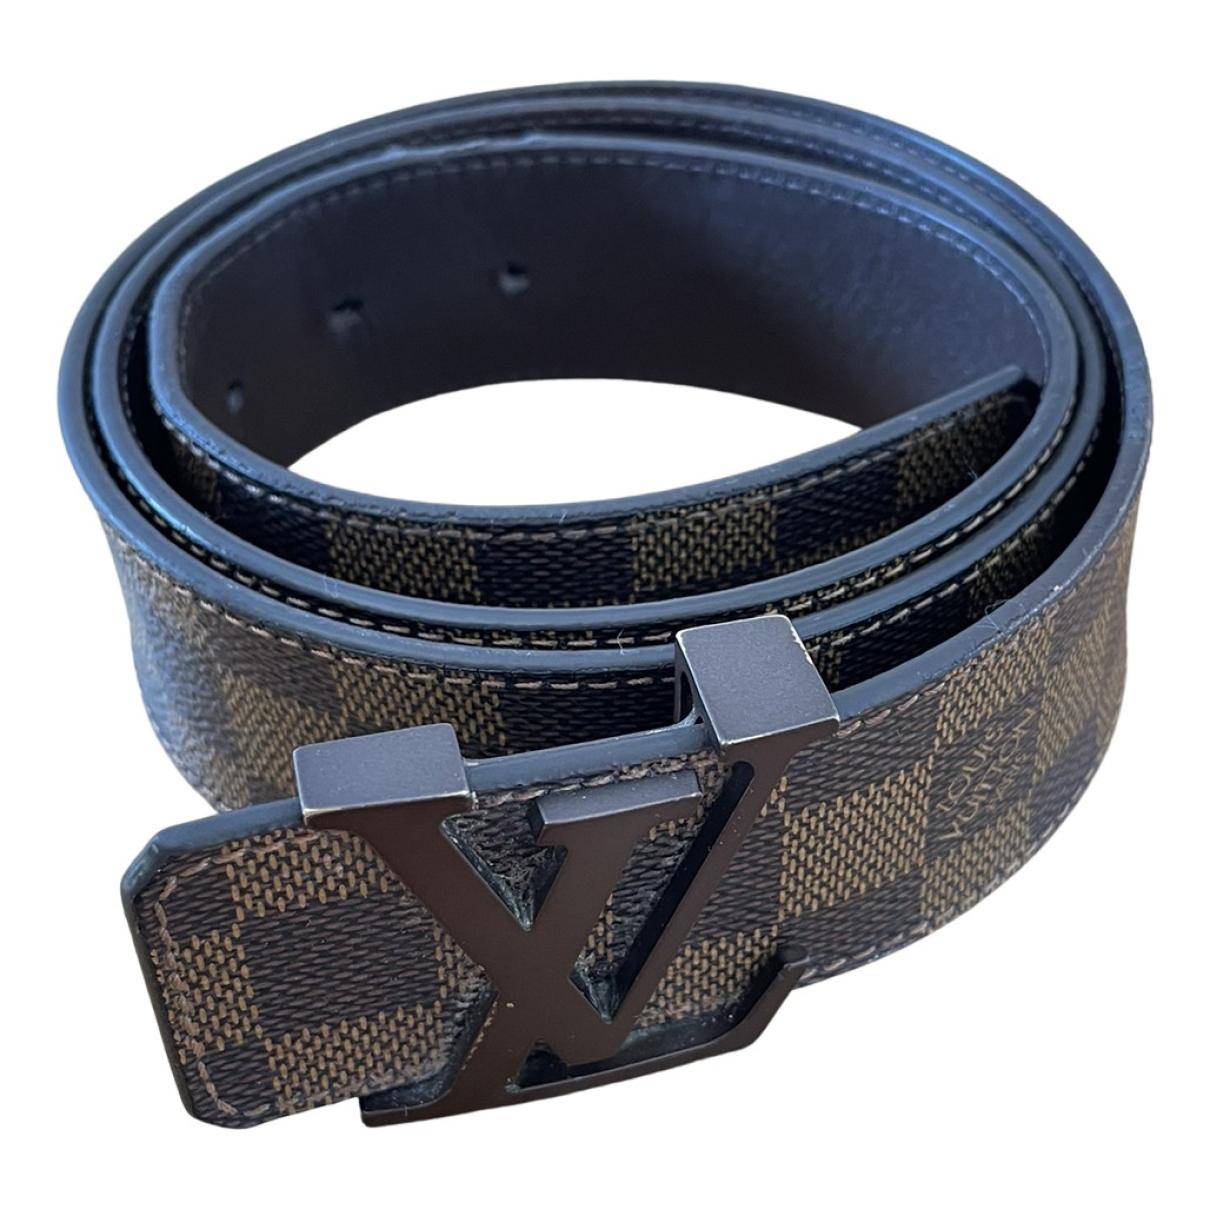 Initiales leather belt Louis Vuitton Black size 100 cm in Leather - 34790937